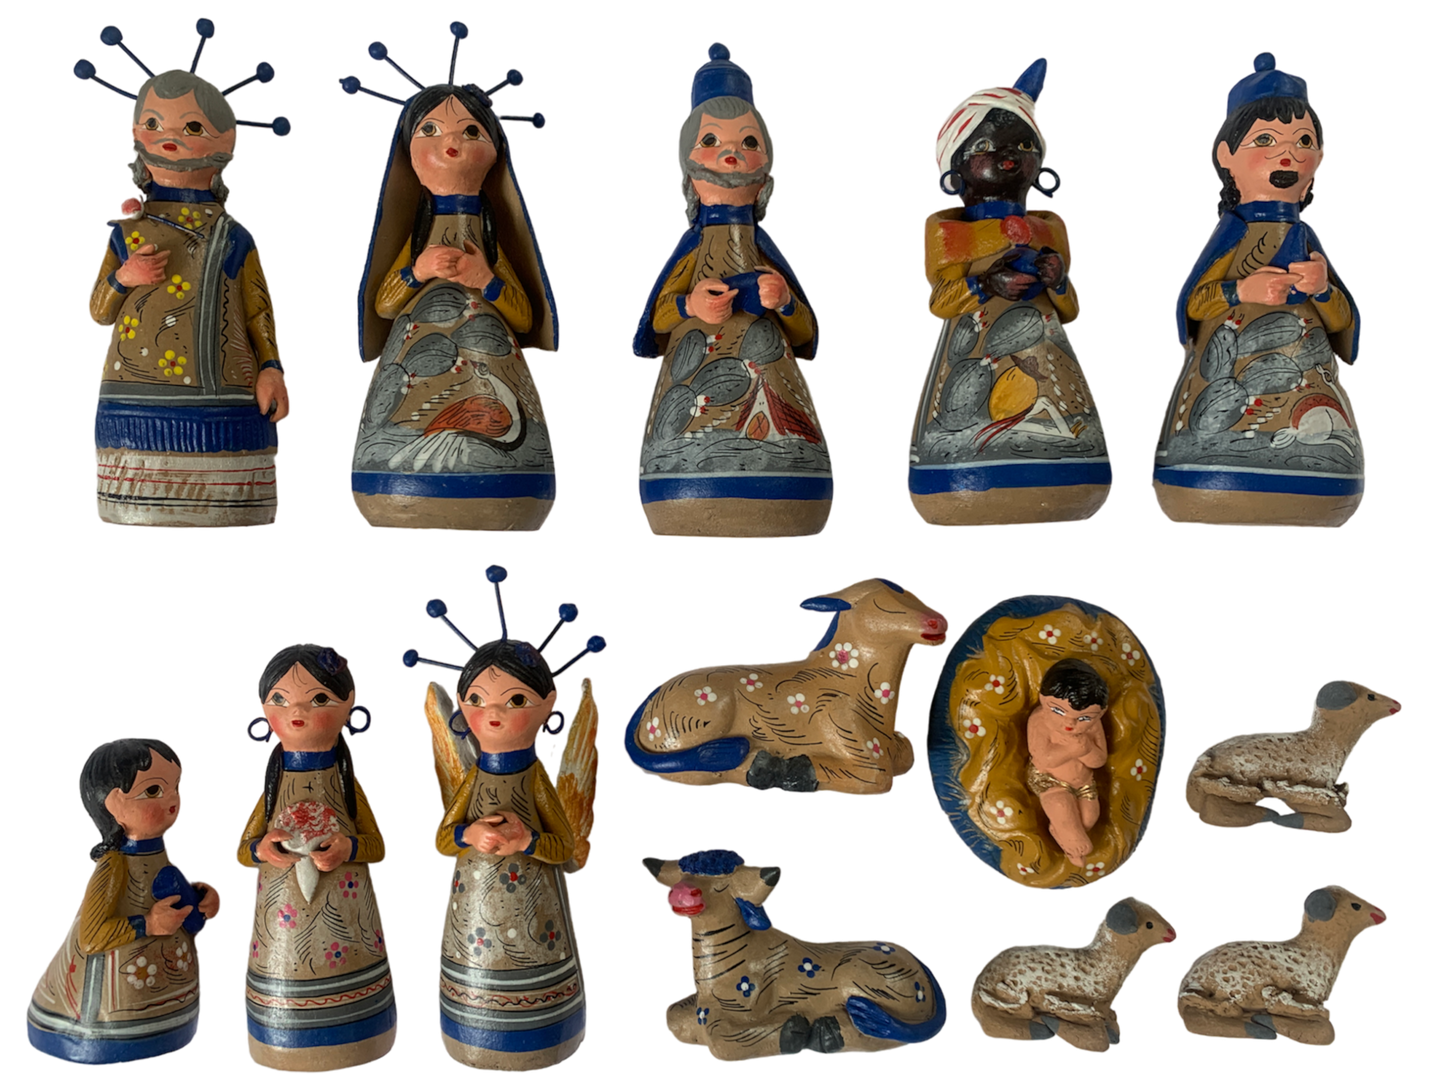 Large nativity scene with 14 figurines, blue